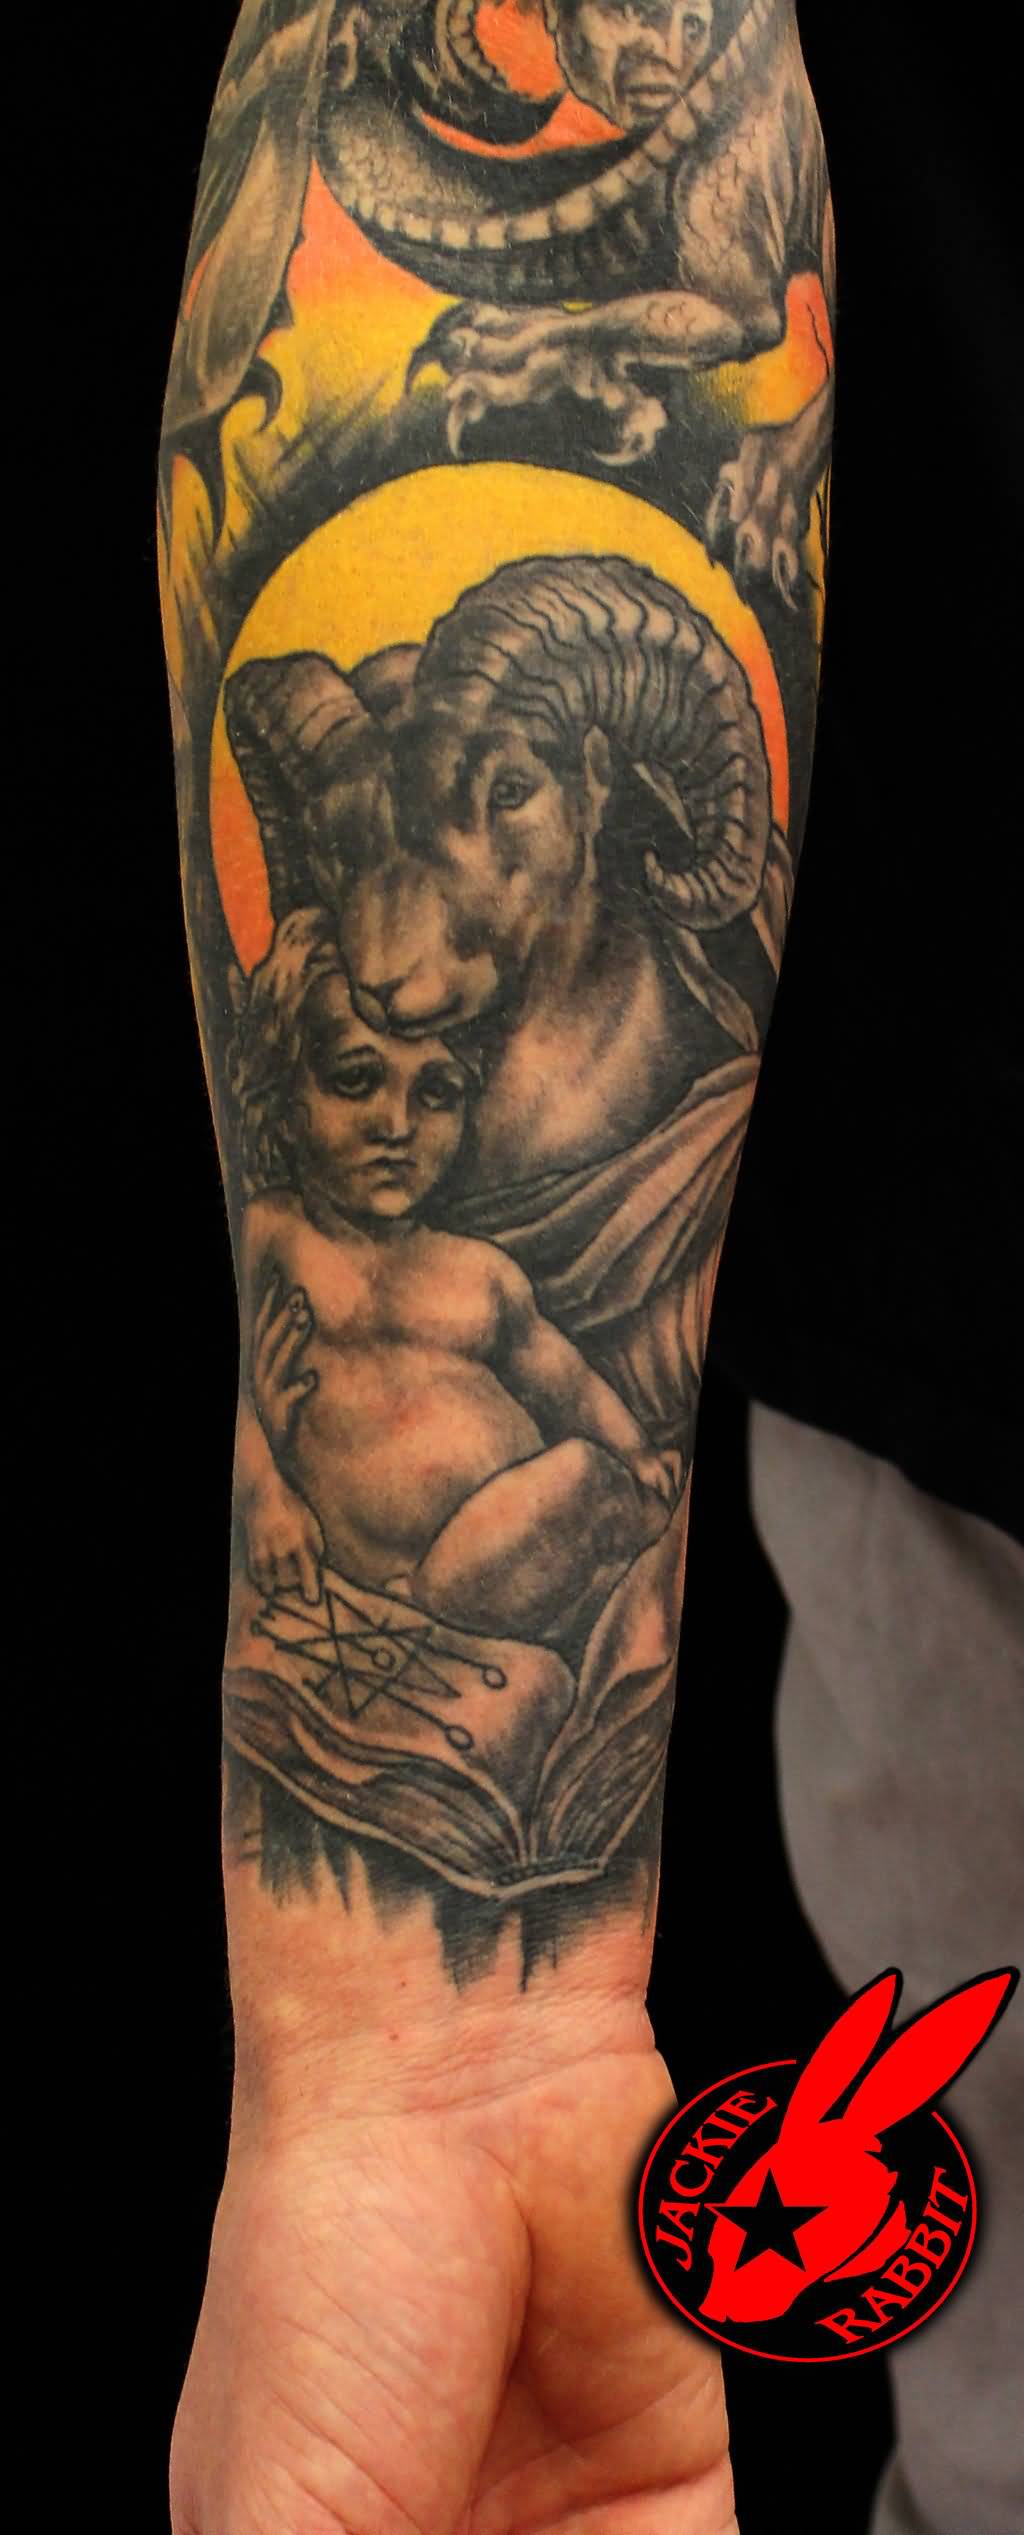 Awesome Satan Baby Tattoo On Forearm By Jackie Rabbit